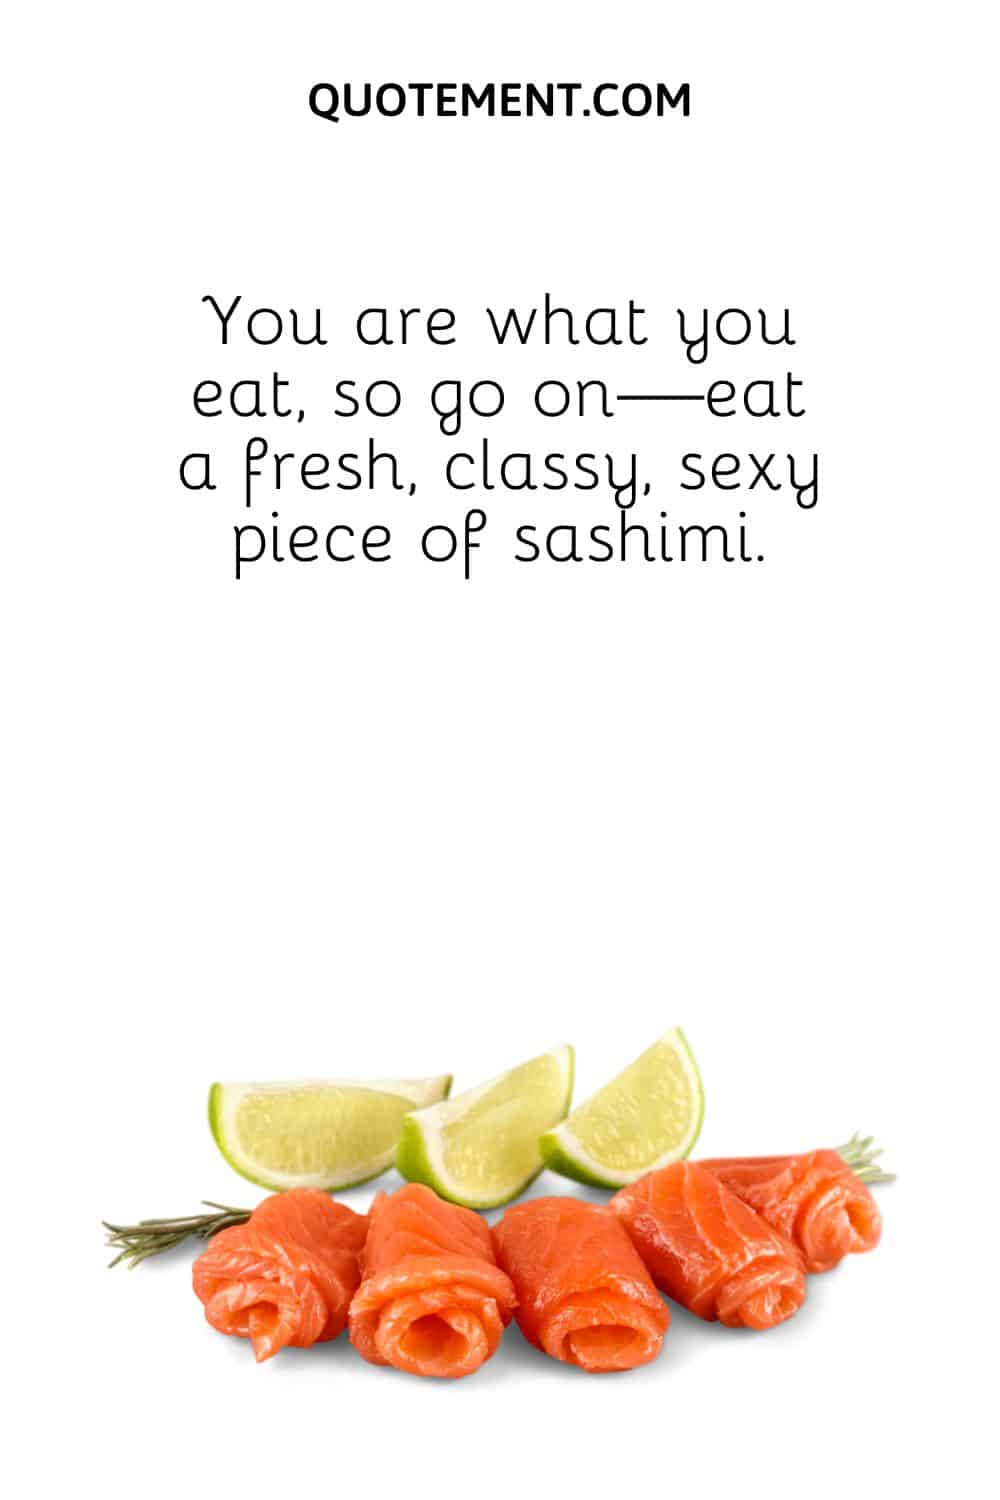 You are what you eat, so go on—eat a fresh, classy, sexy piece of sashimi.